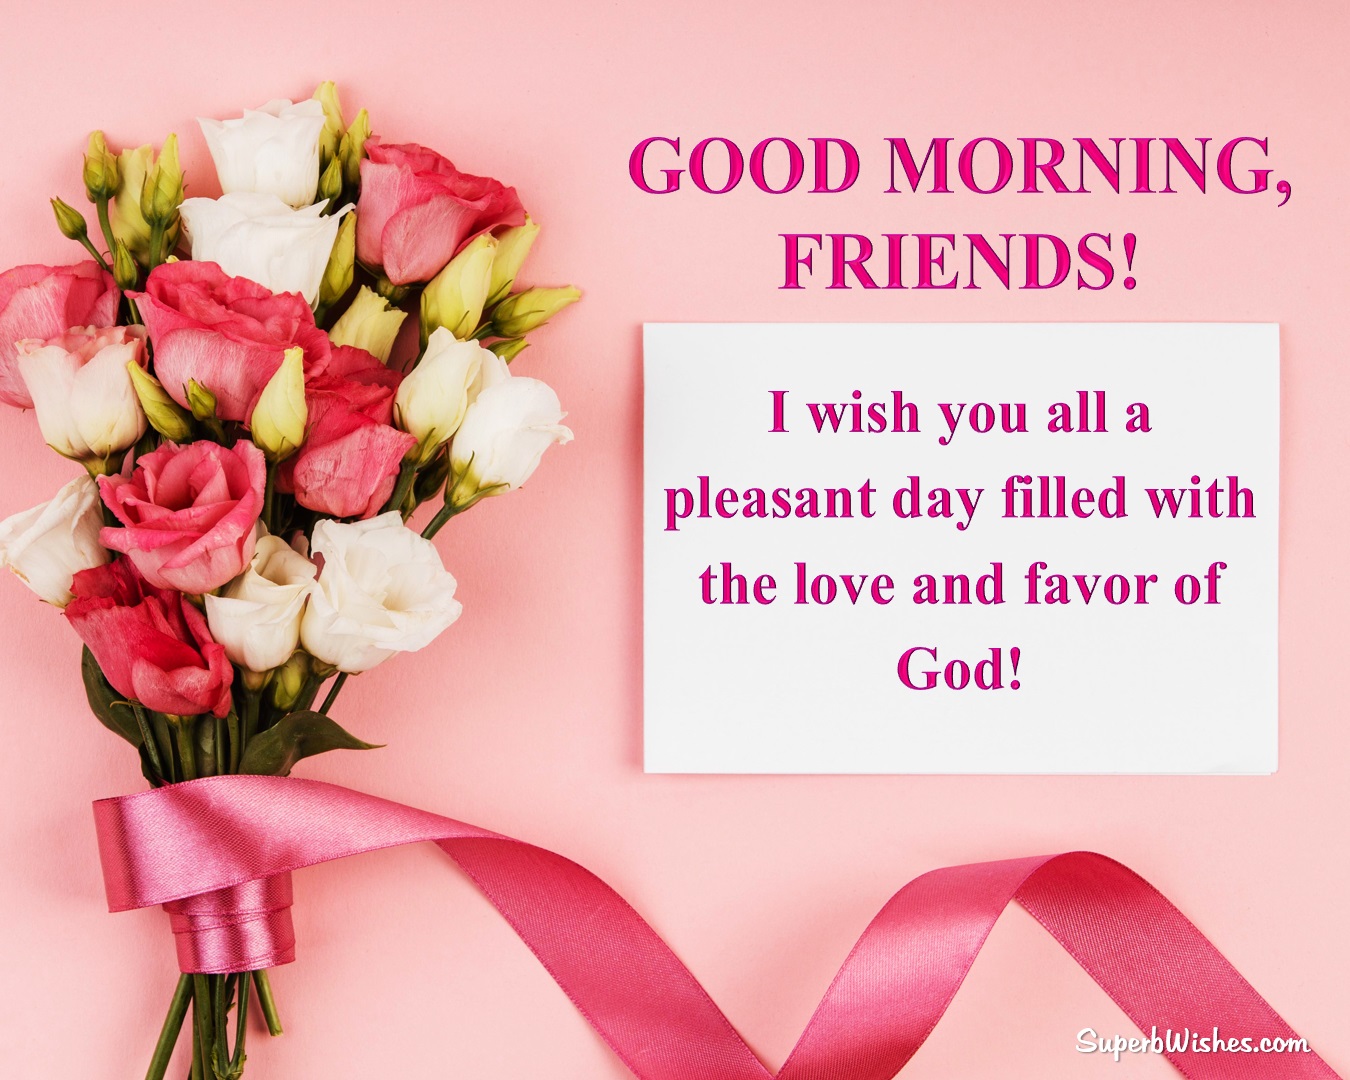 Good Morning Wishes For Friends Images - The Love of God ...